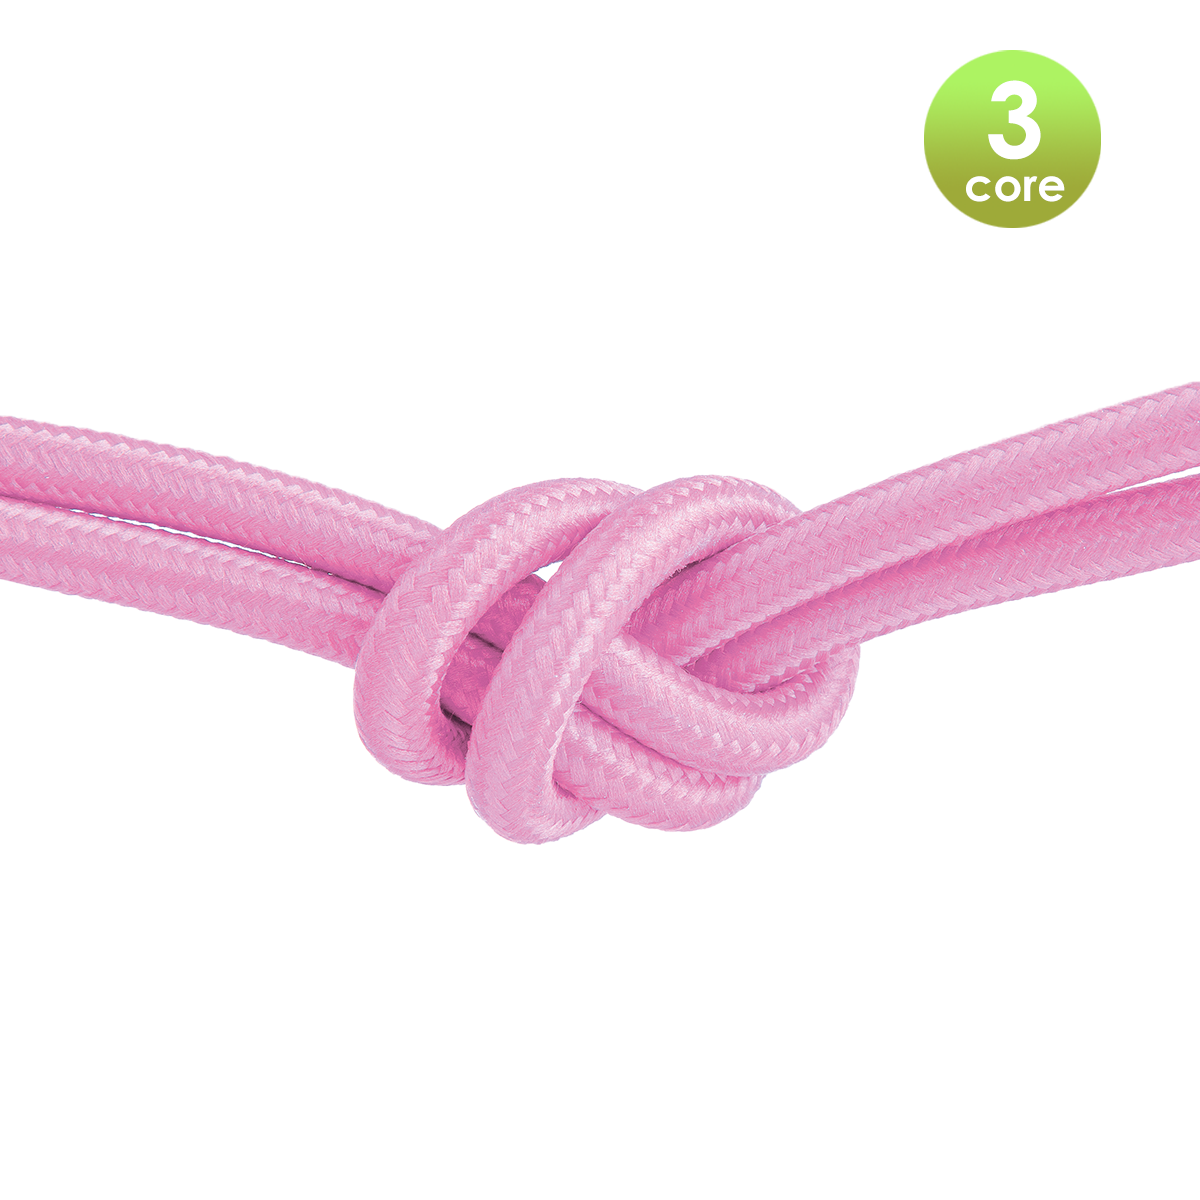 Tangla lighting - TLCB01003RD - 3c - Fabric cable 3 core - in light hot pink